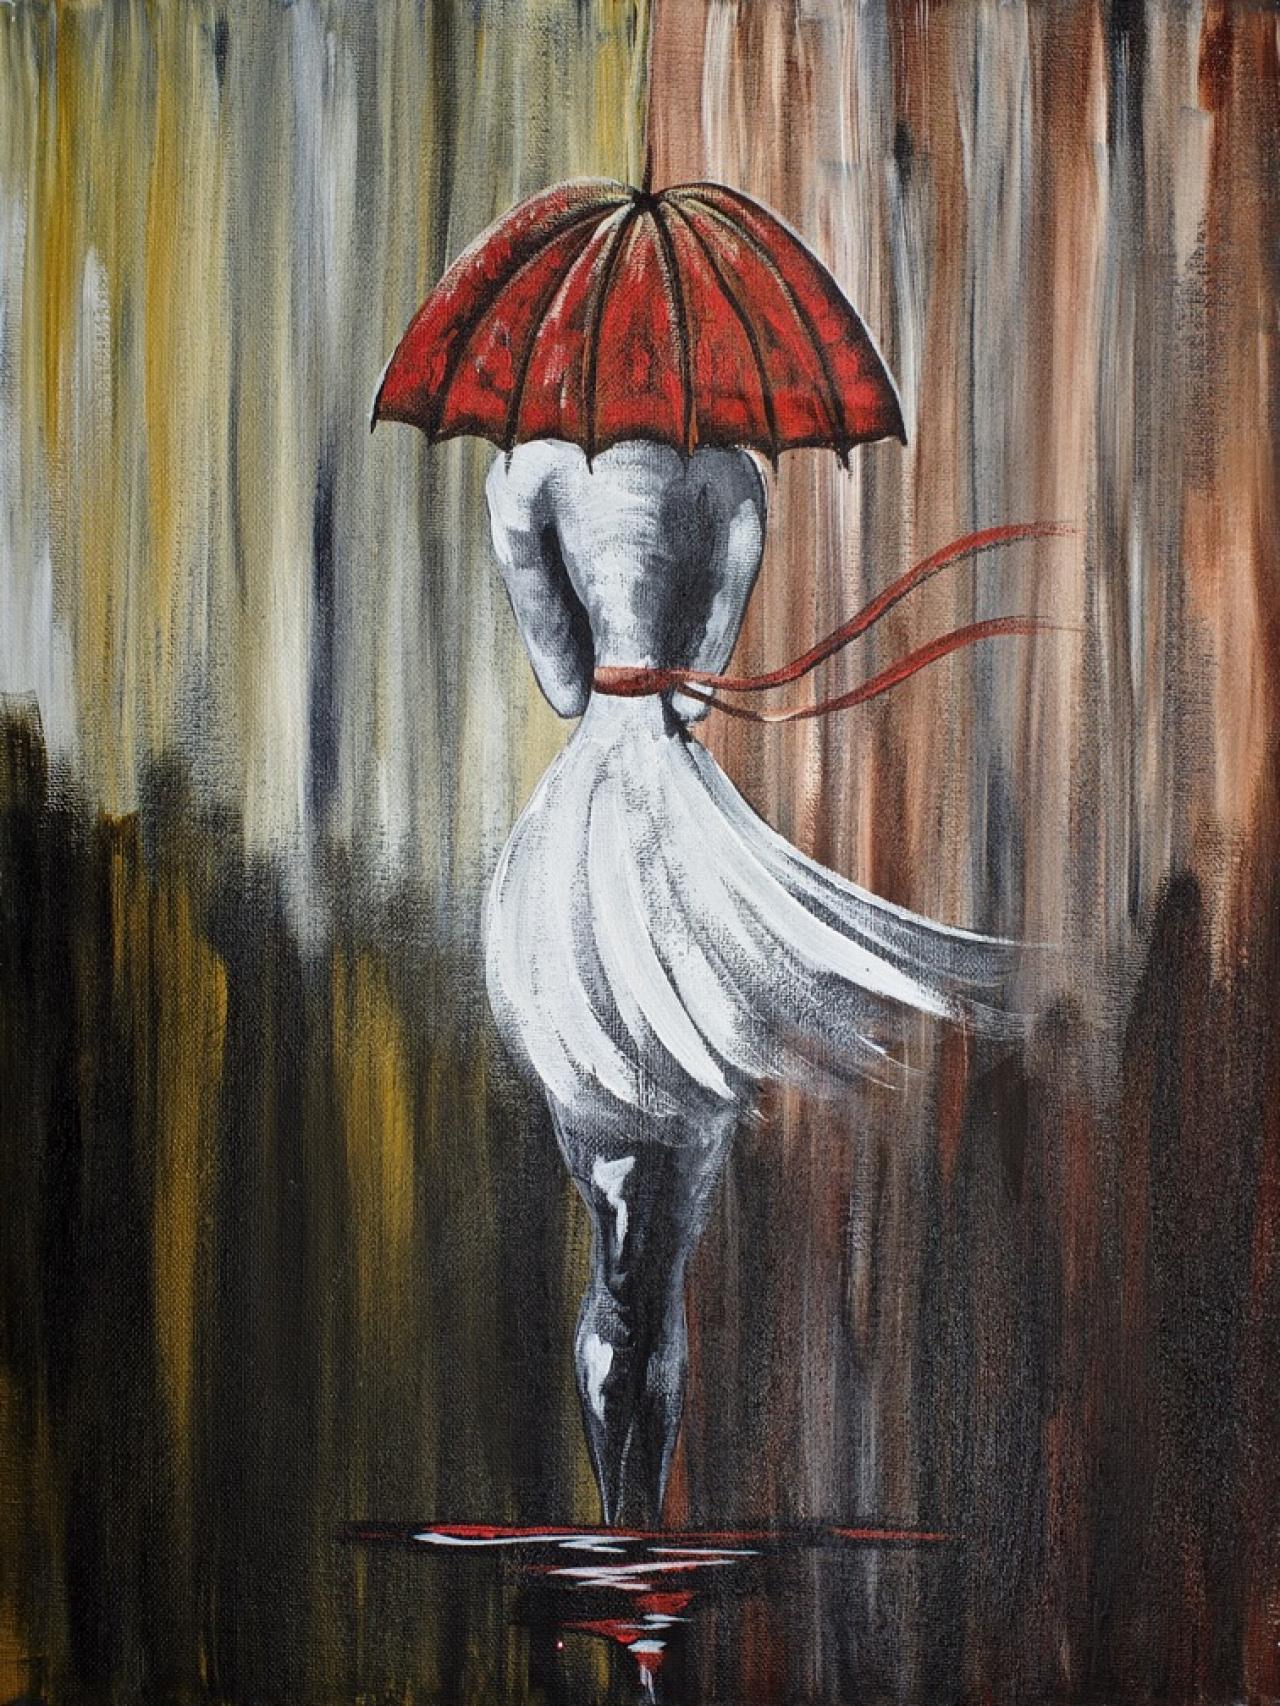 Walking In The Rain Girl With Red Umbrella Abstract The Art